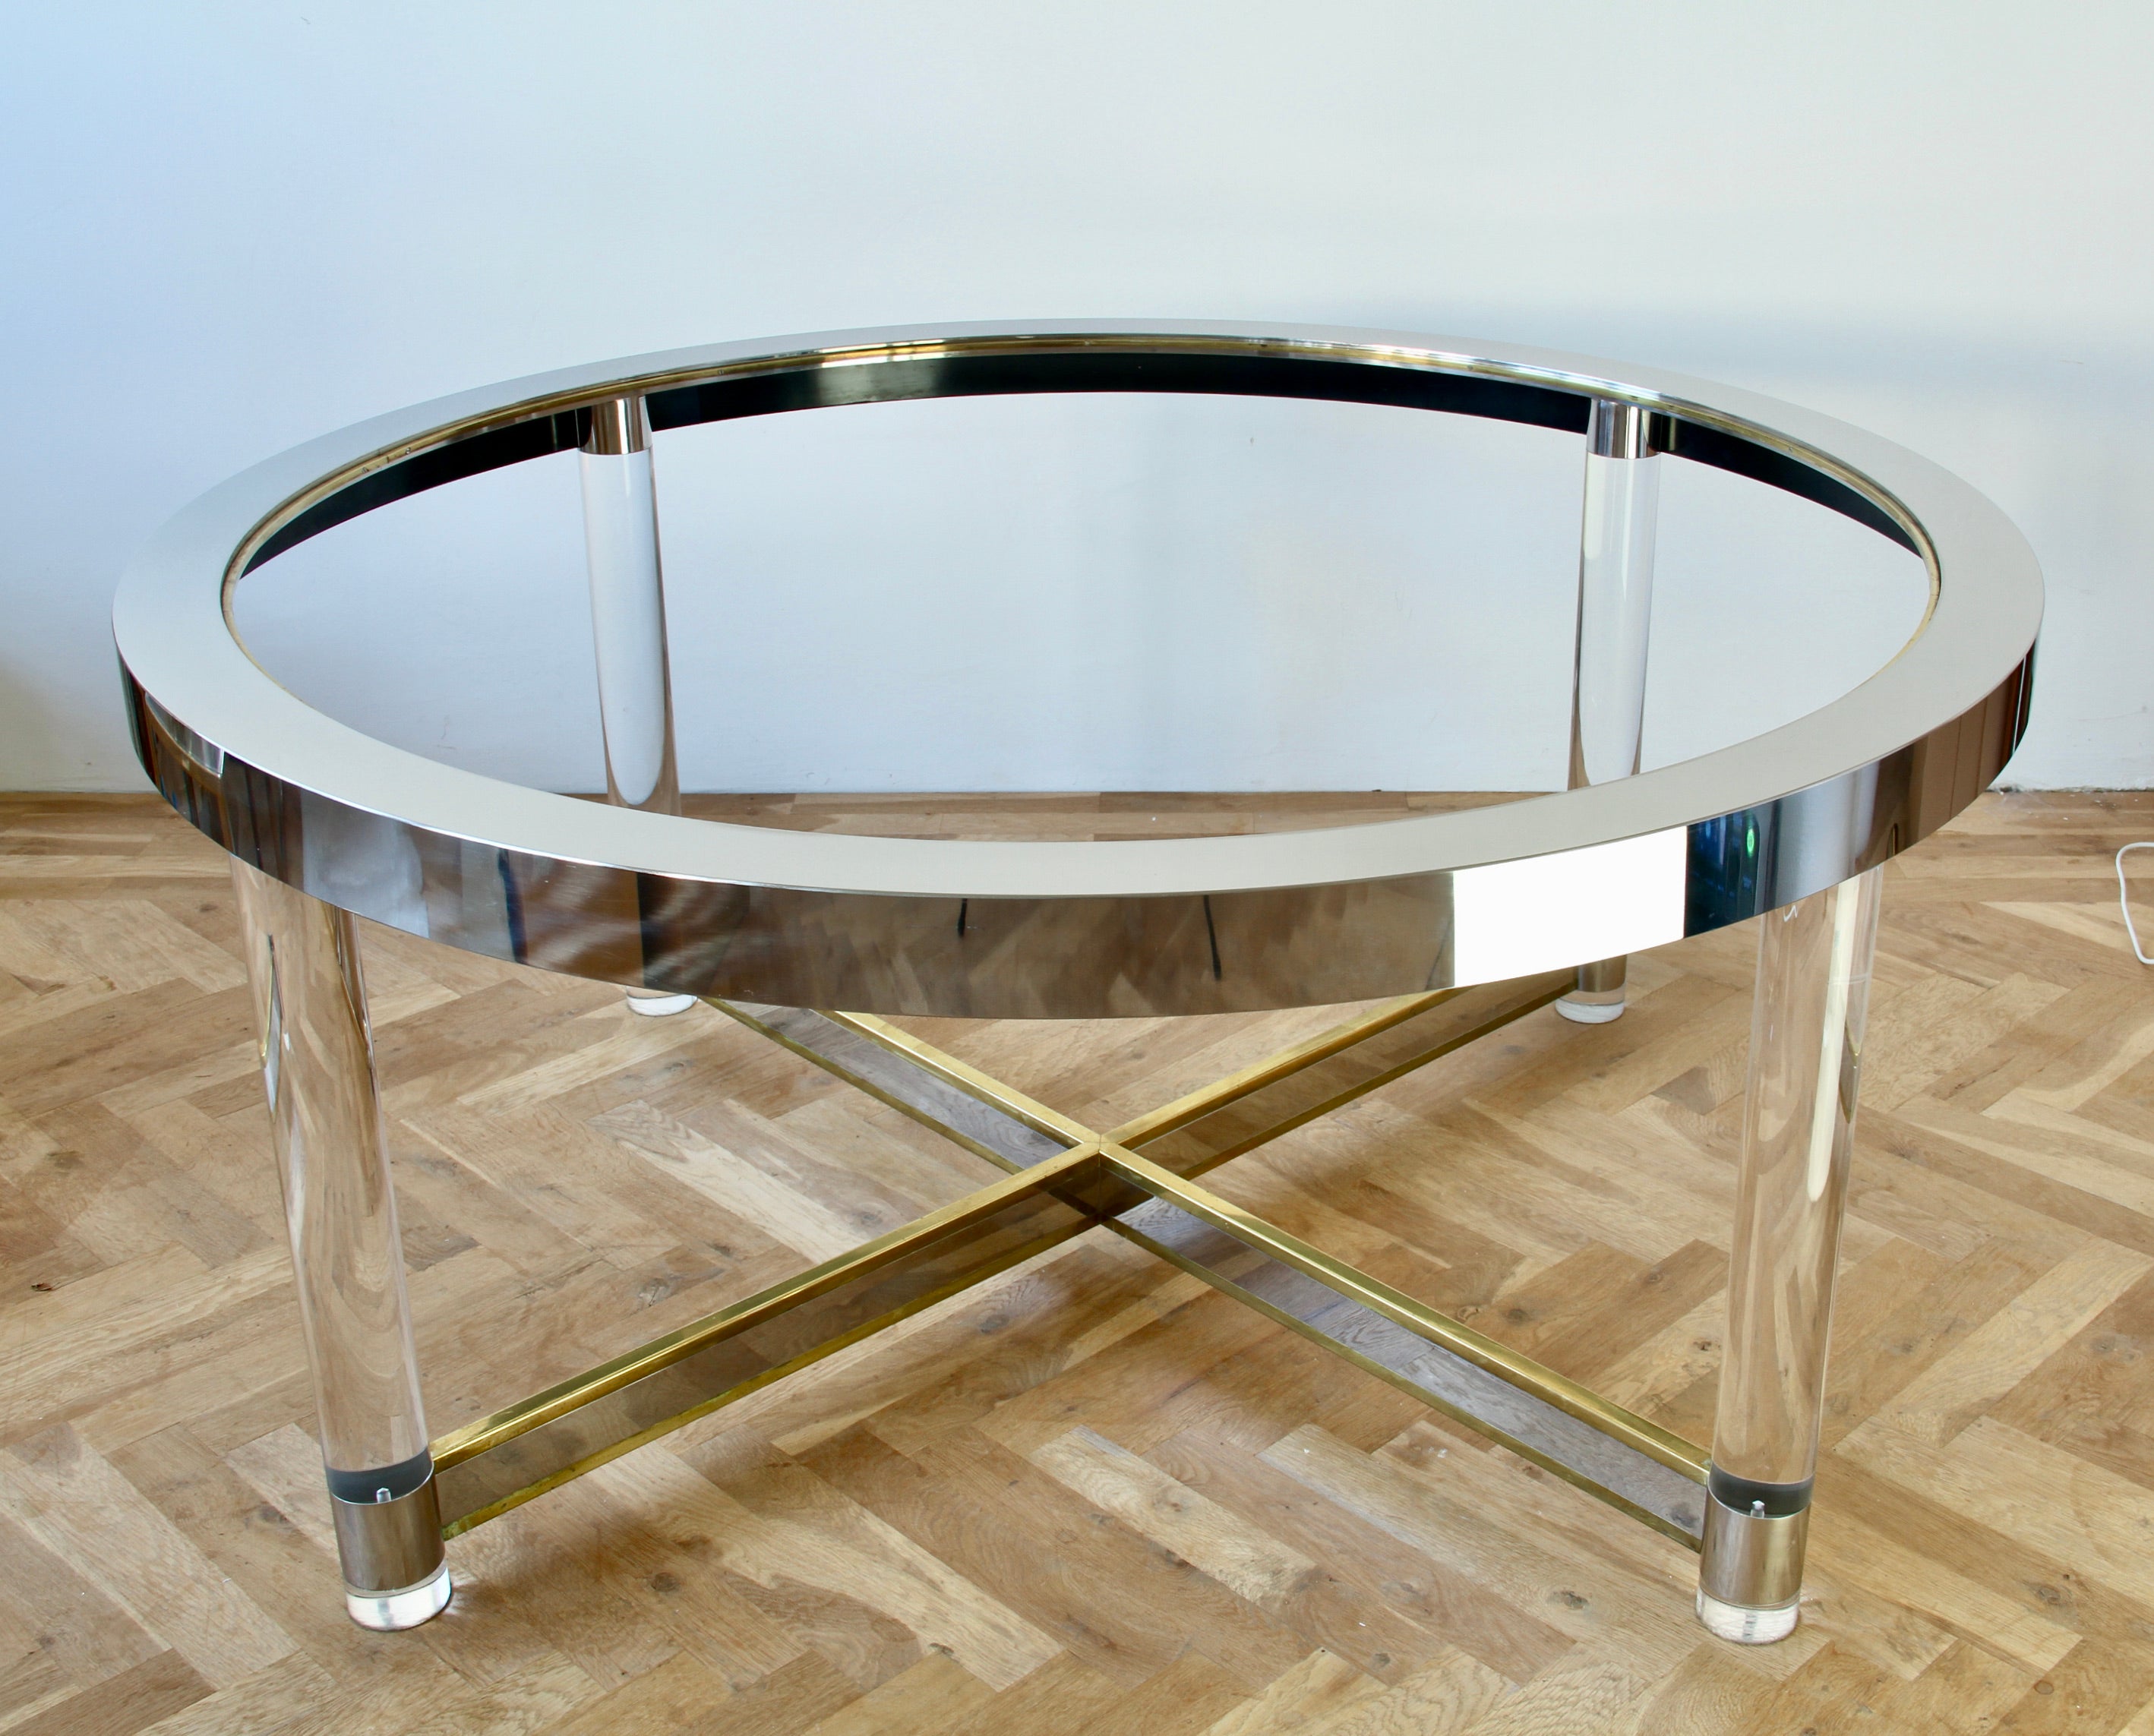 Stunning large vintage Mid-Century modern dining table in polished brass and chrome with acrylic / Lucite legs in the style of Maison Jansen, Karl Springer and Charles Hollis Jones circa 1970s. Perfect for the Hollywood Regency style enthusiast or